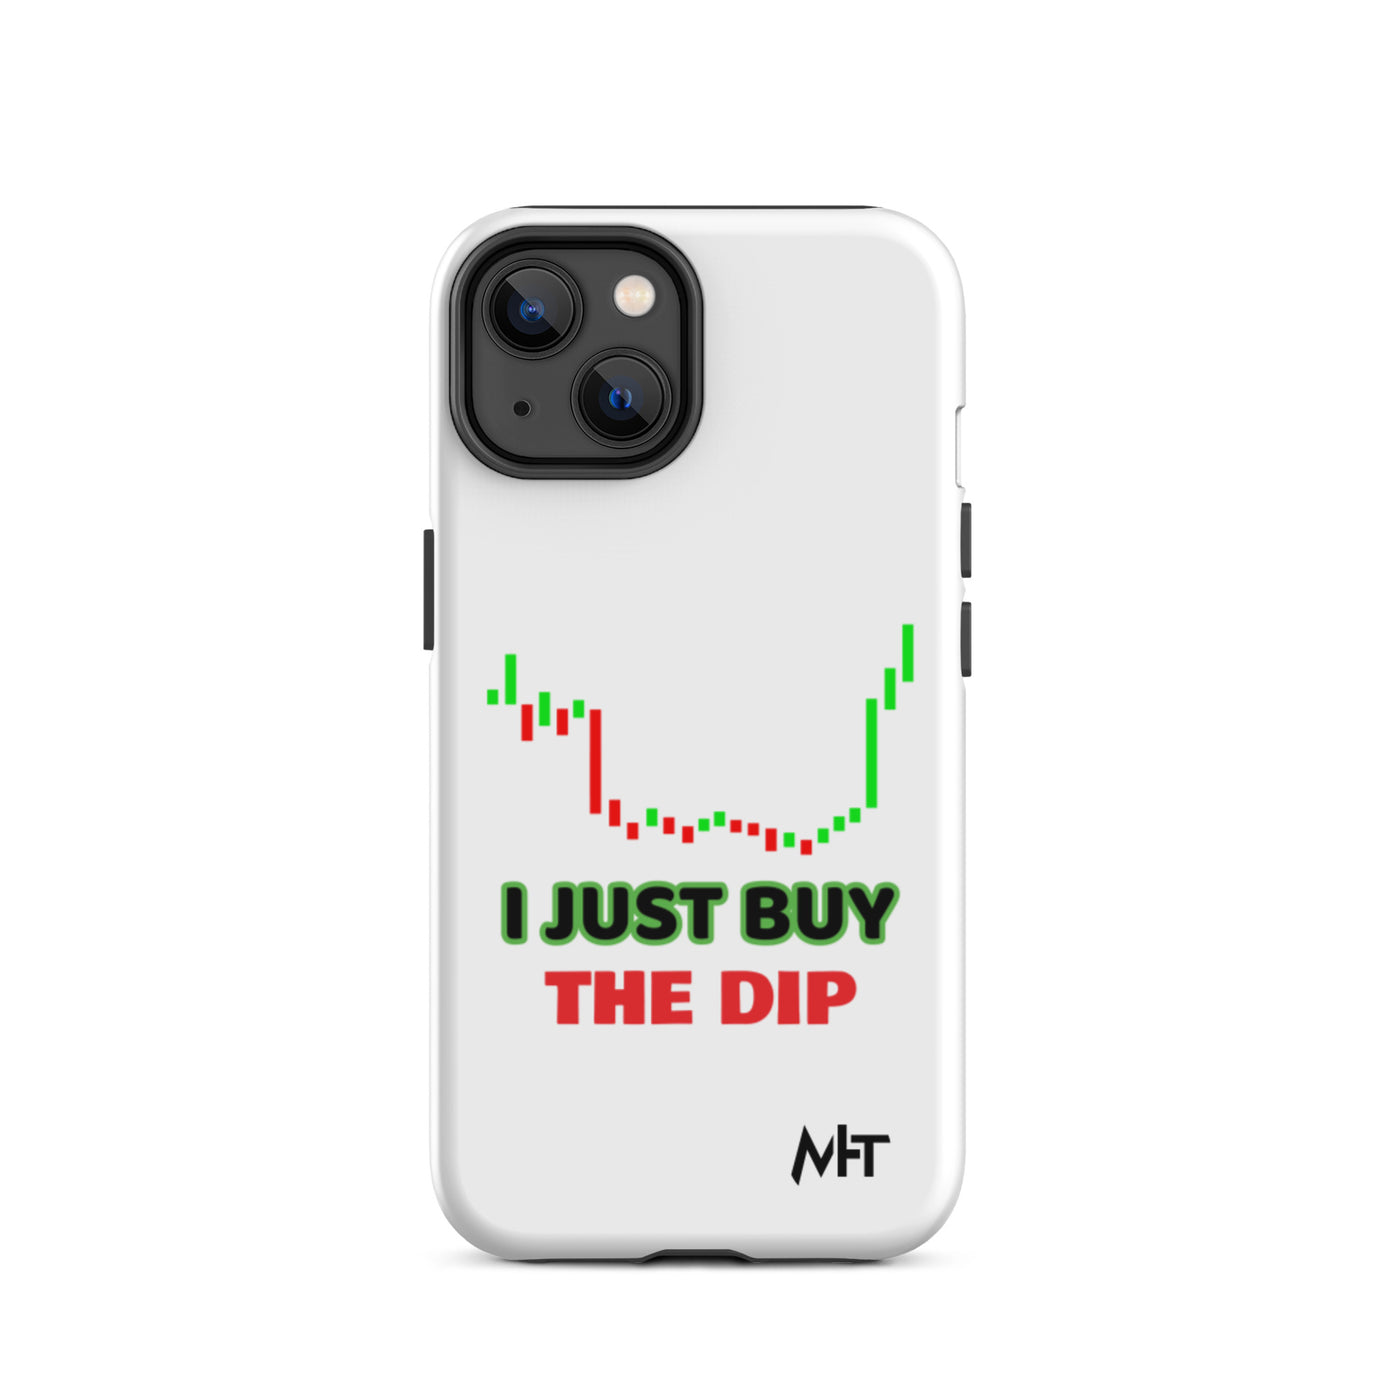 I just buy the deep - Tough iPhone case